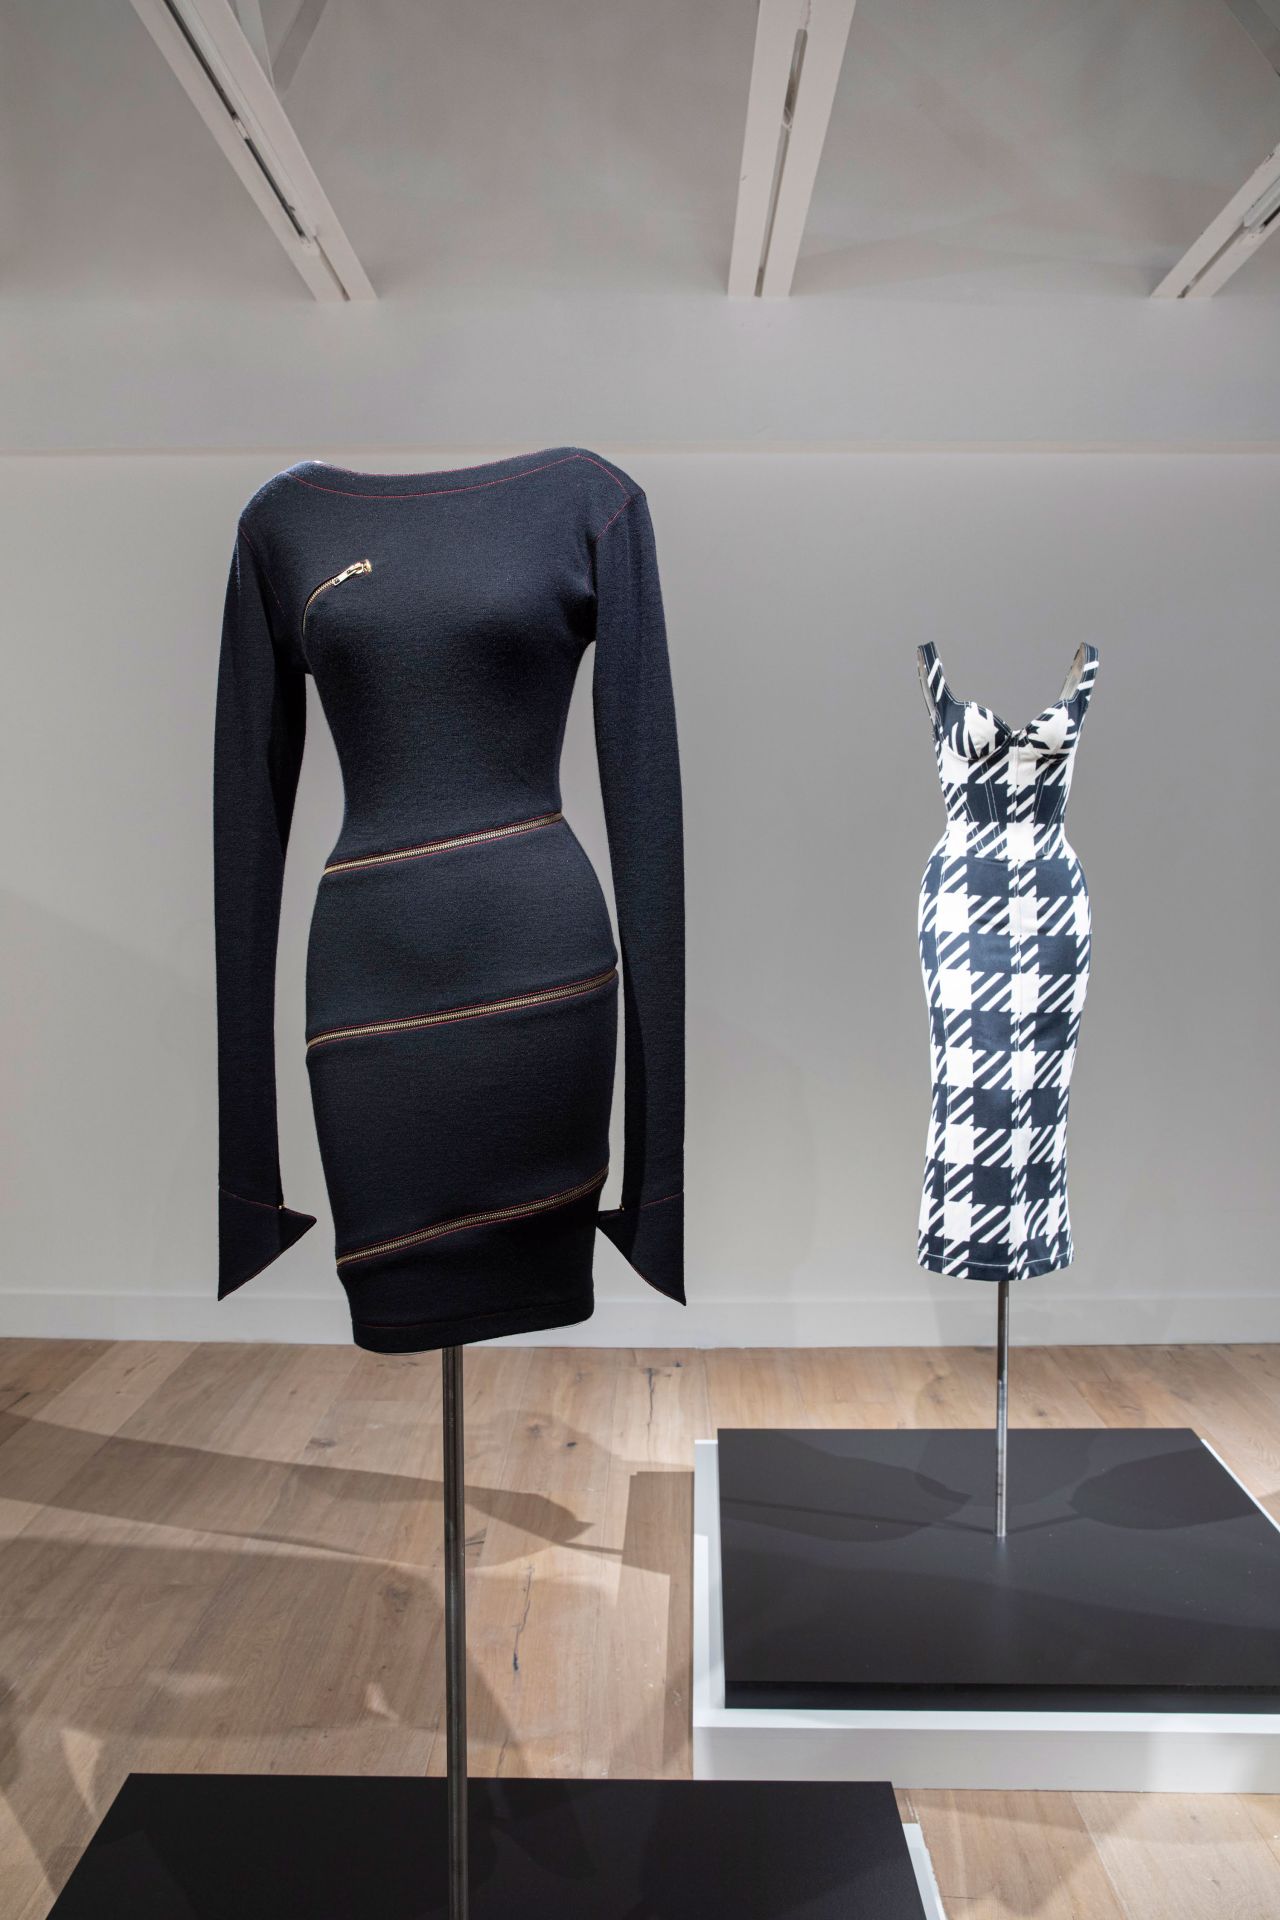 Alaïa and Adrian: Exhibition explores ties between two fashion greats | CNN